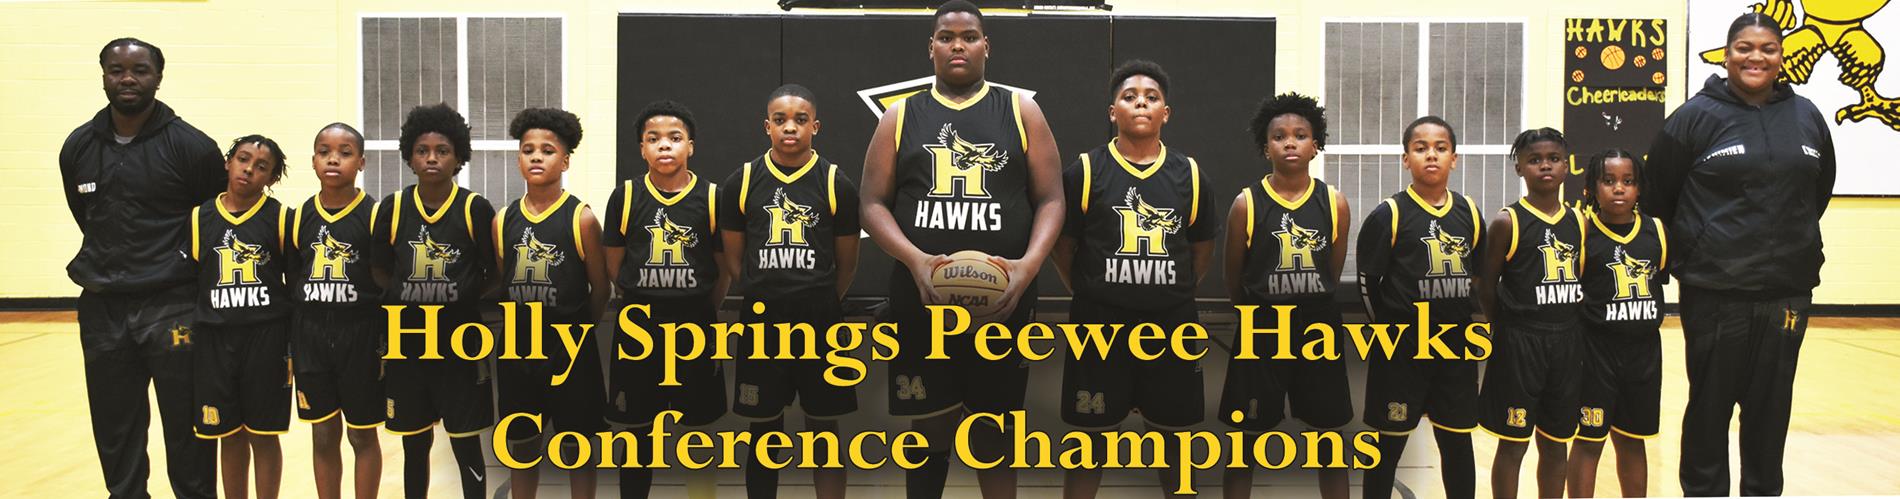 HS Peewee Conference Champions